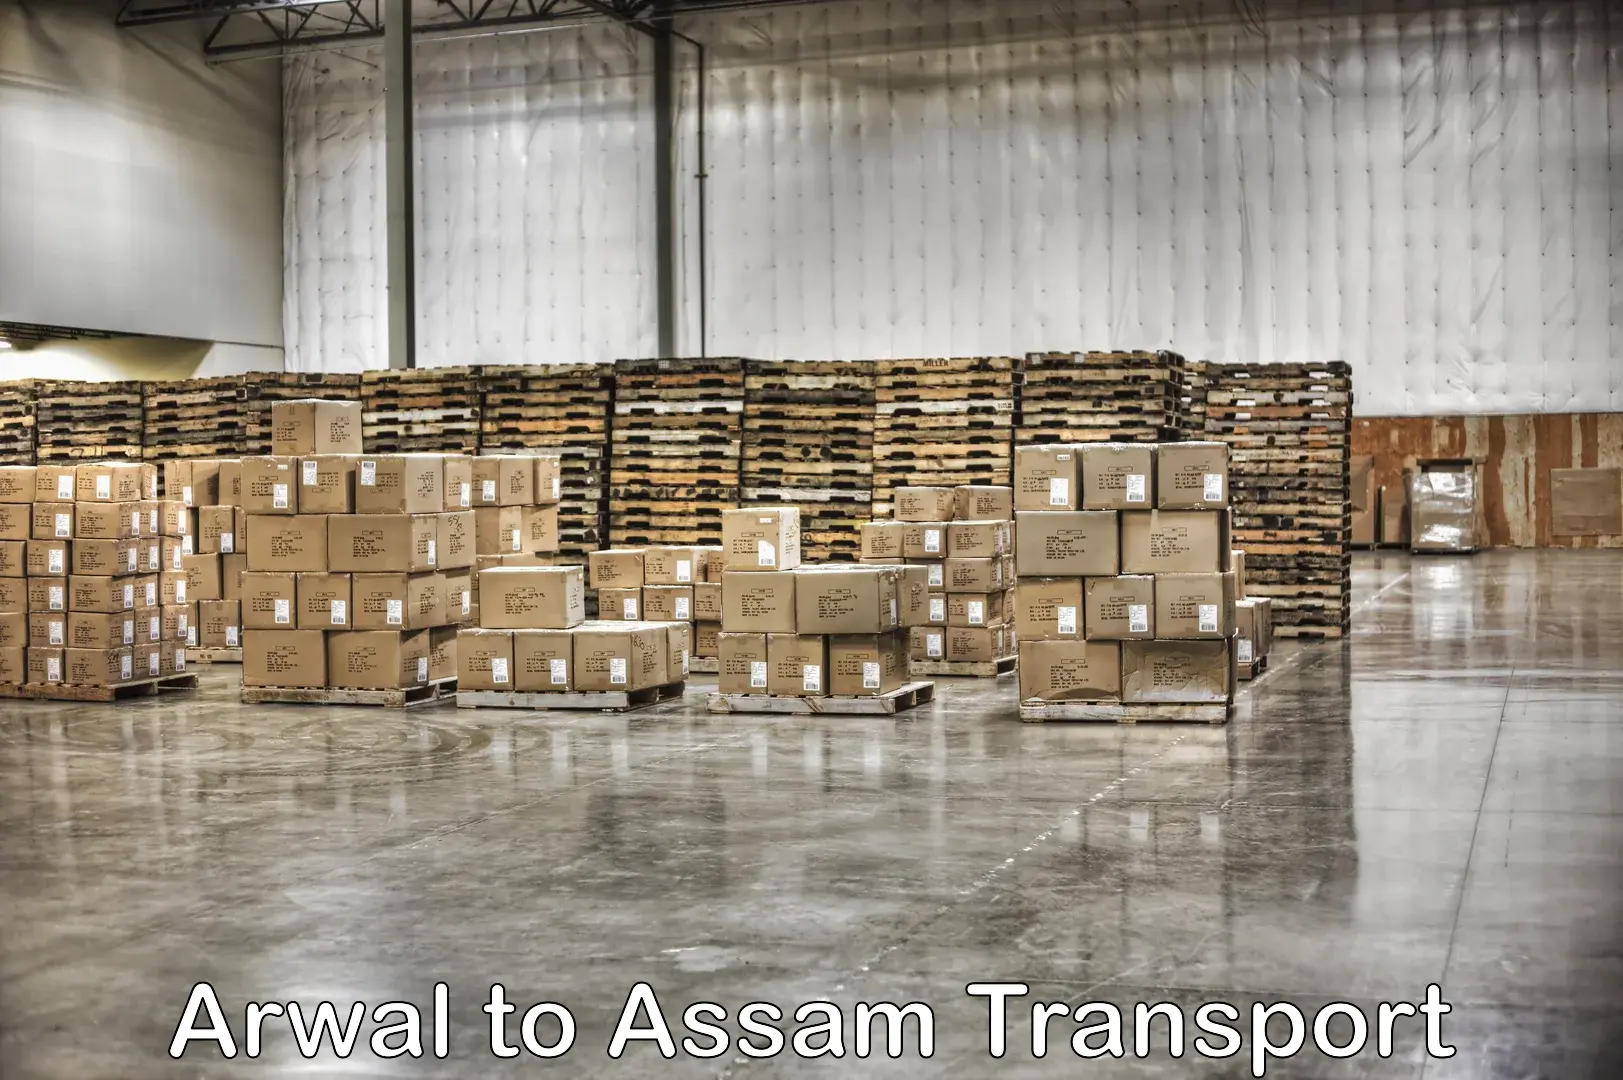 Nearby transport service Arwal to Lala Assam